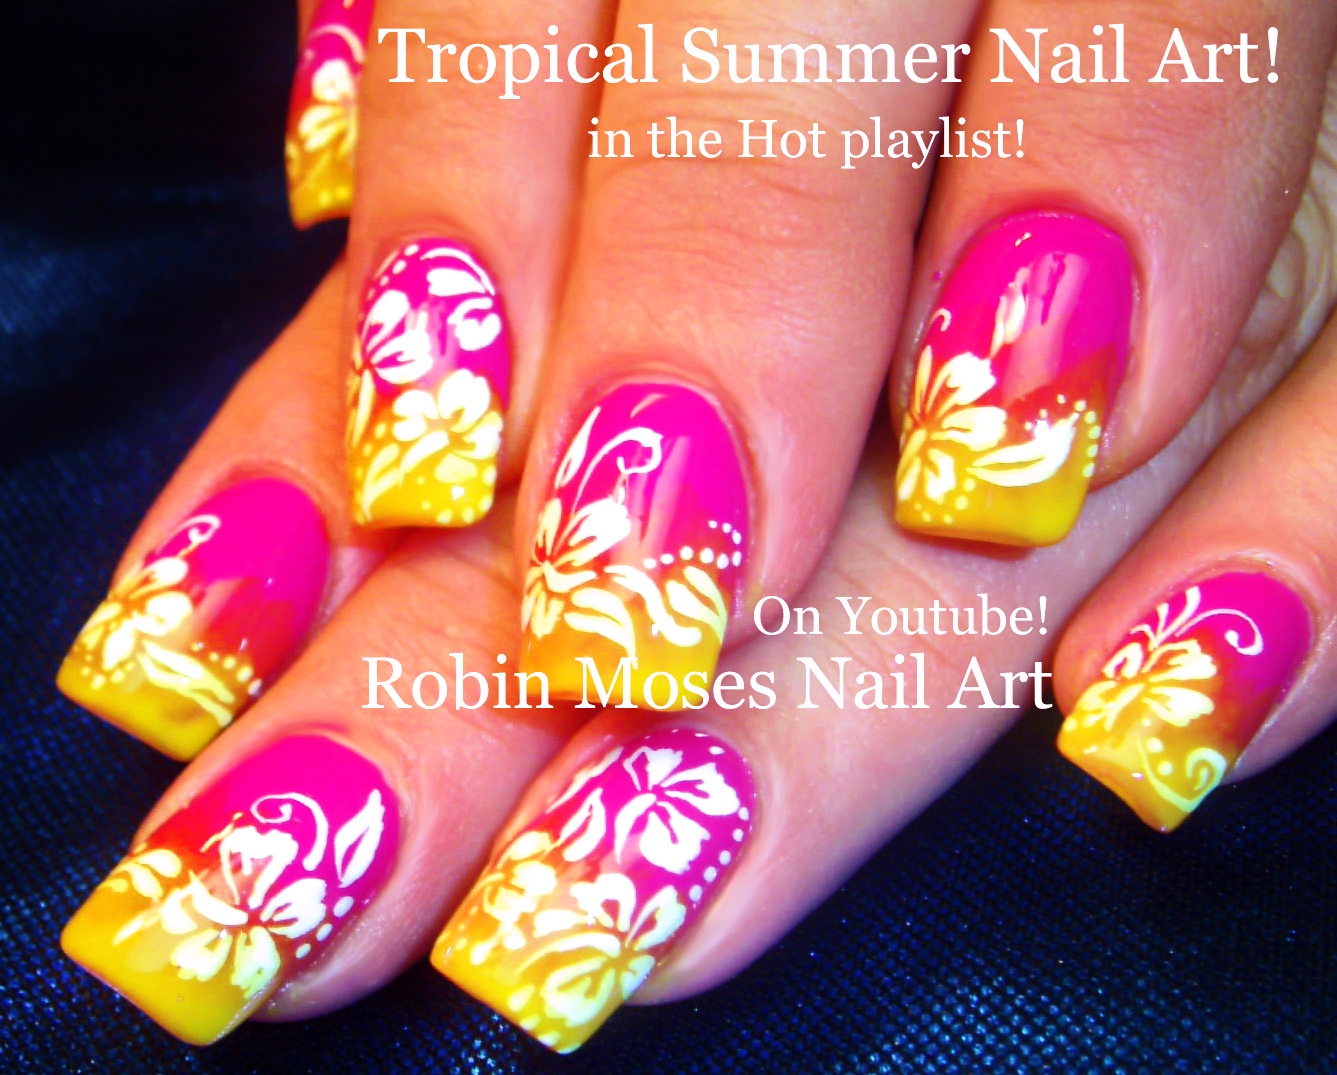 2. Bright and Colorful Tropical Toe Nail Designs - wide 4